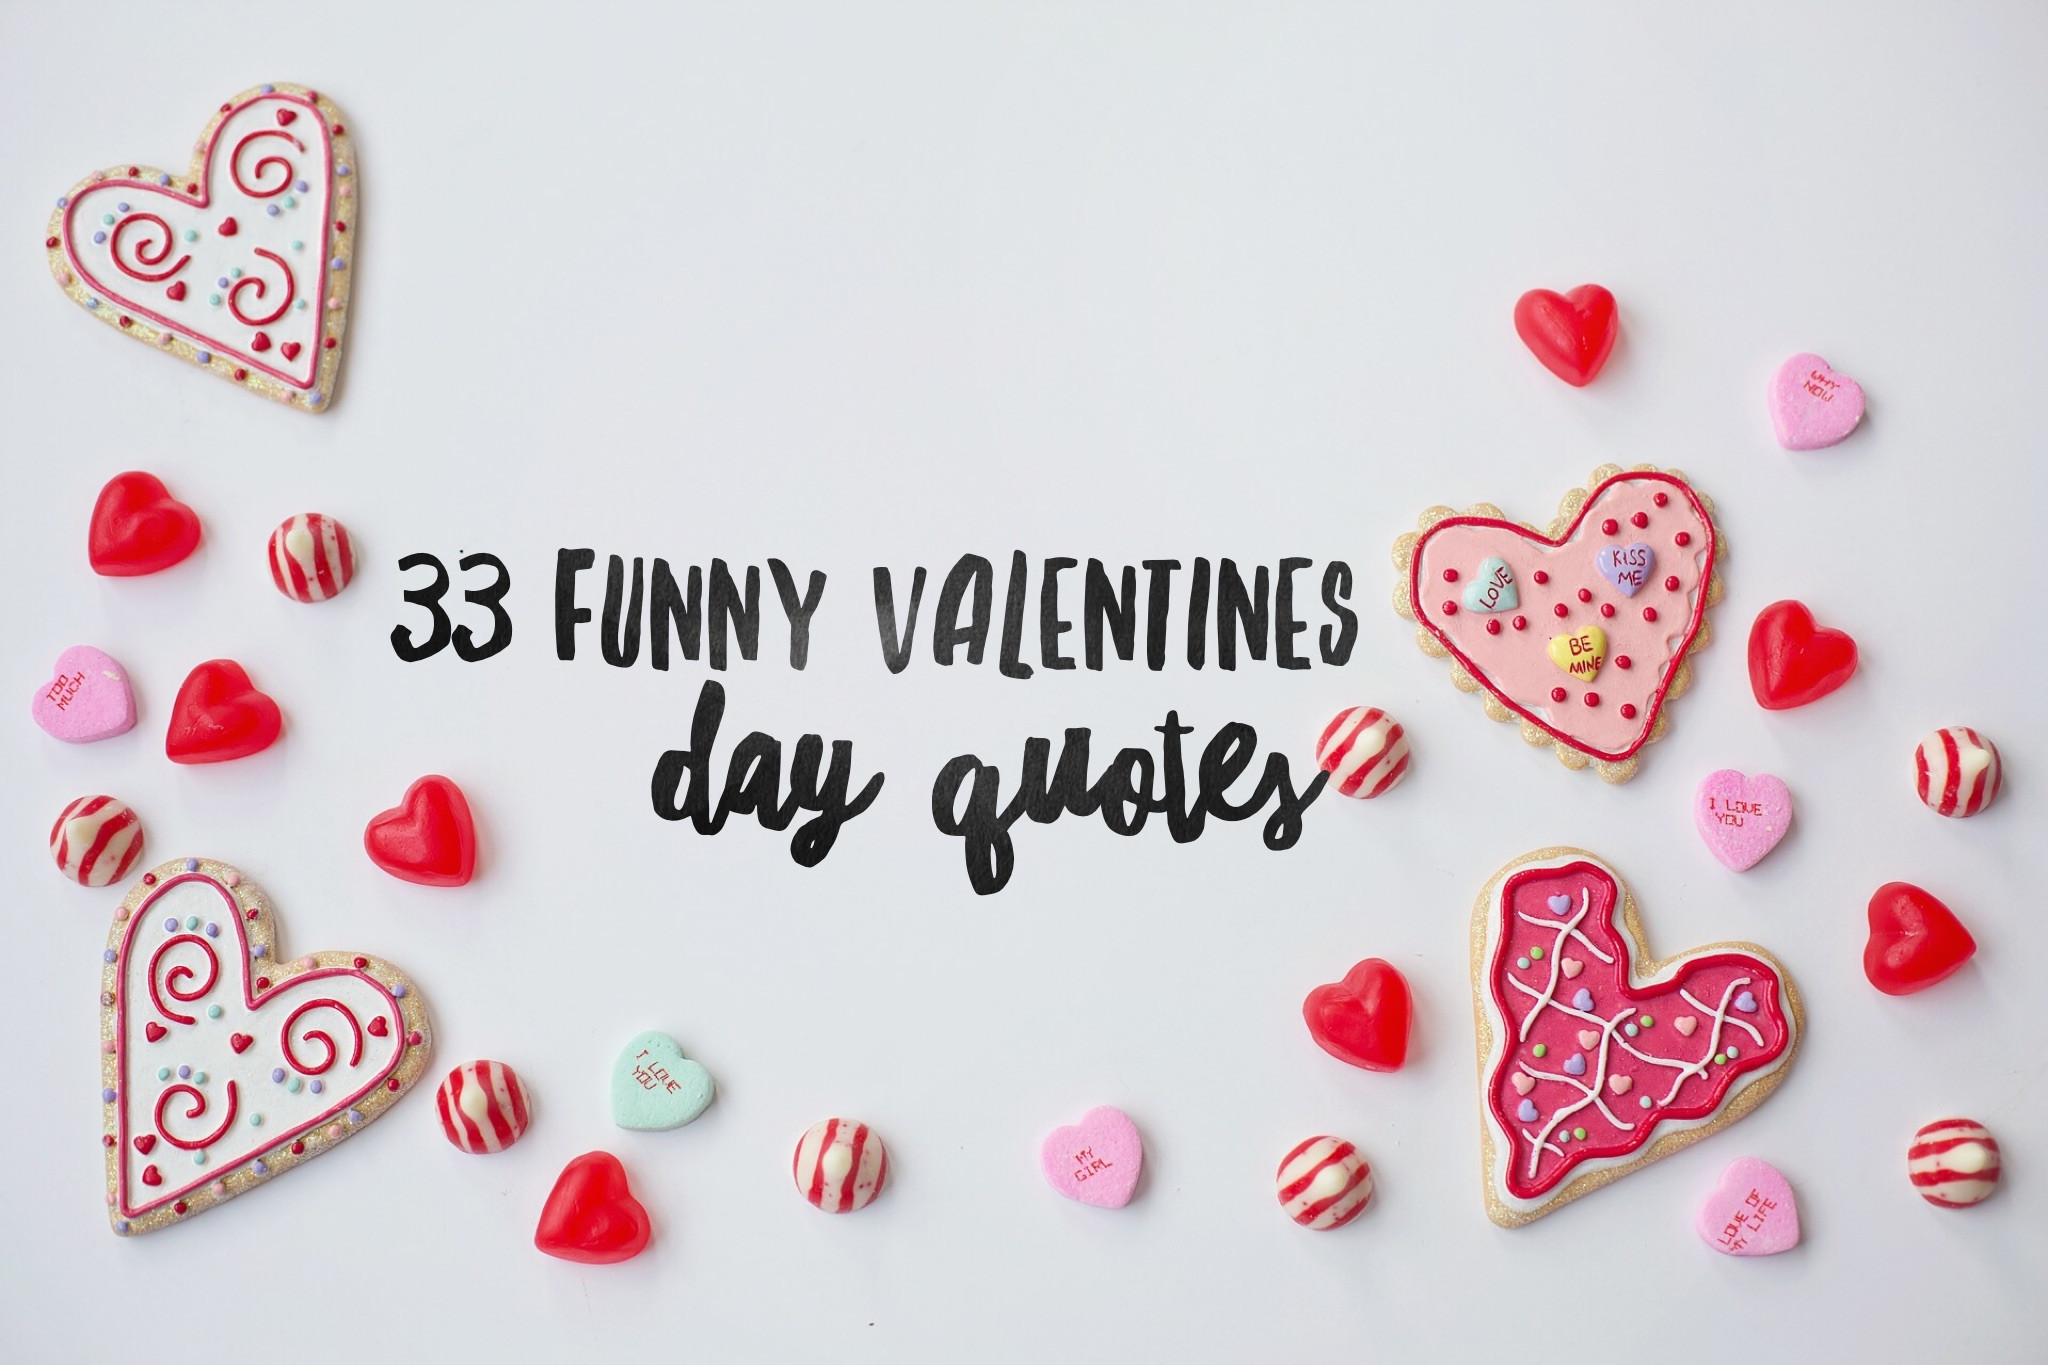 Quotes About Valentines Day
 33 Funny Valentines Day Quotes